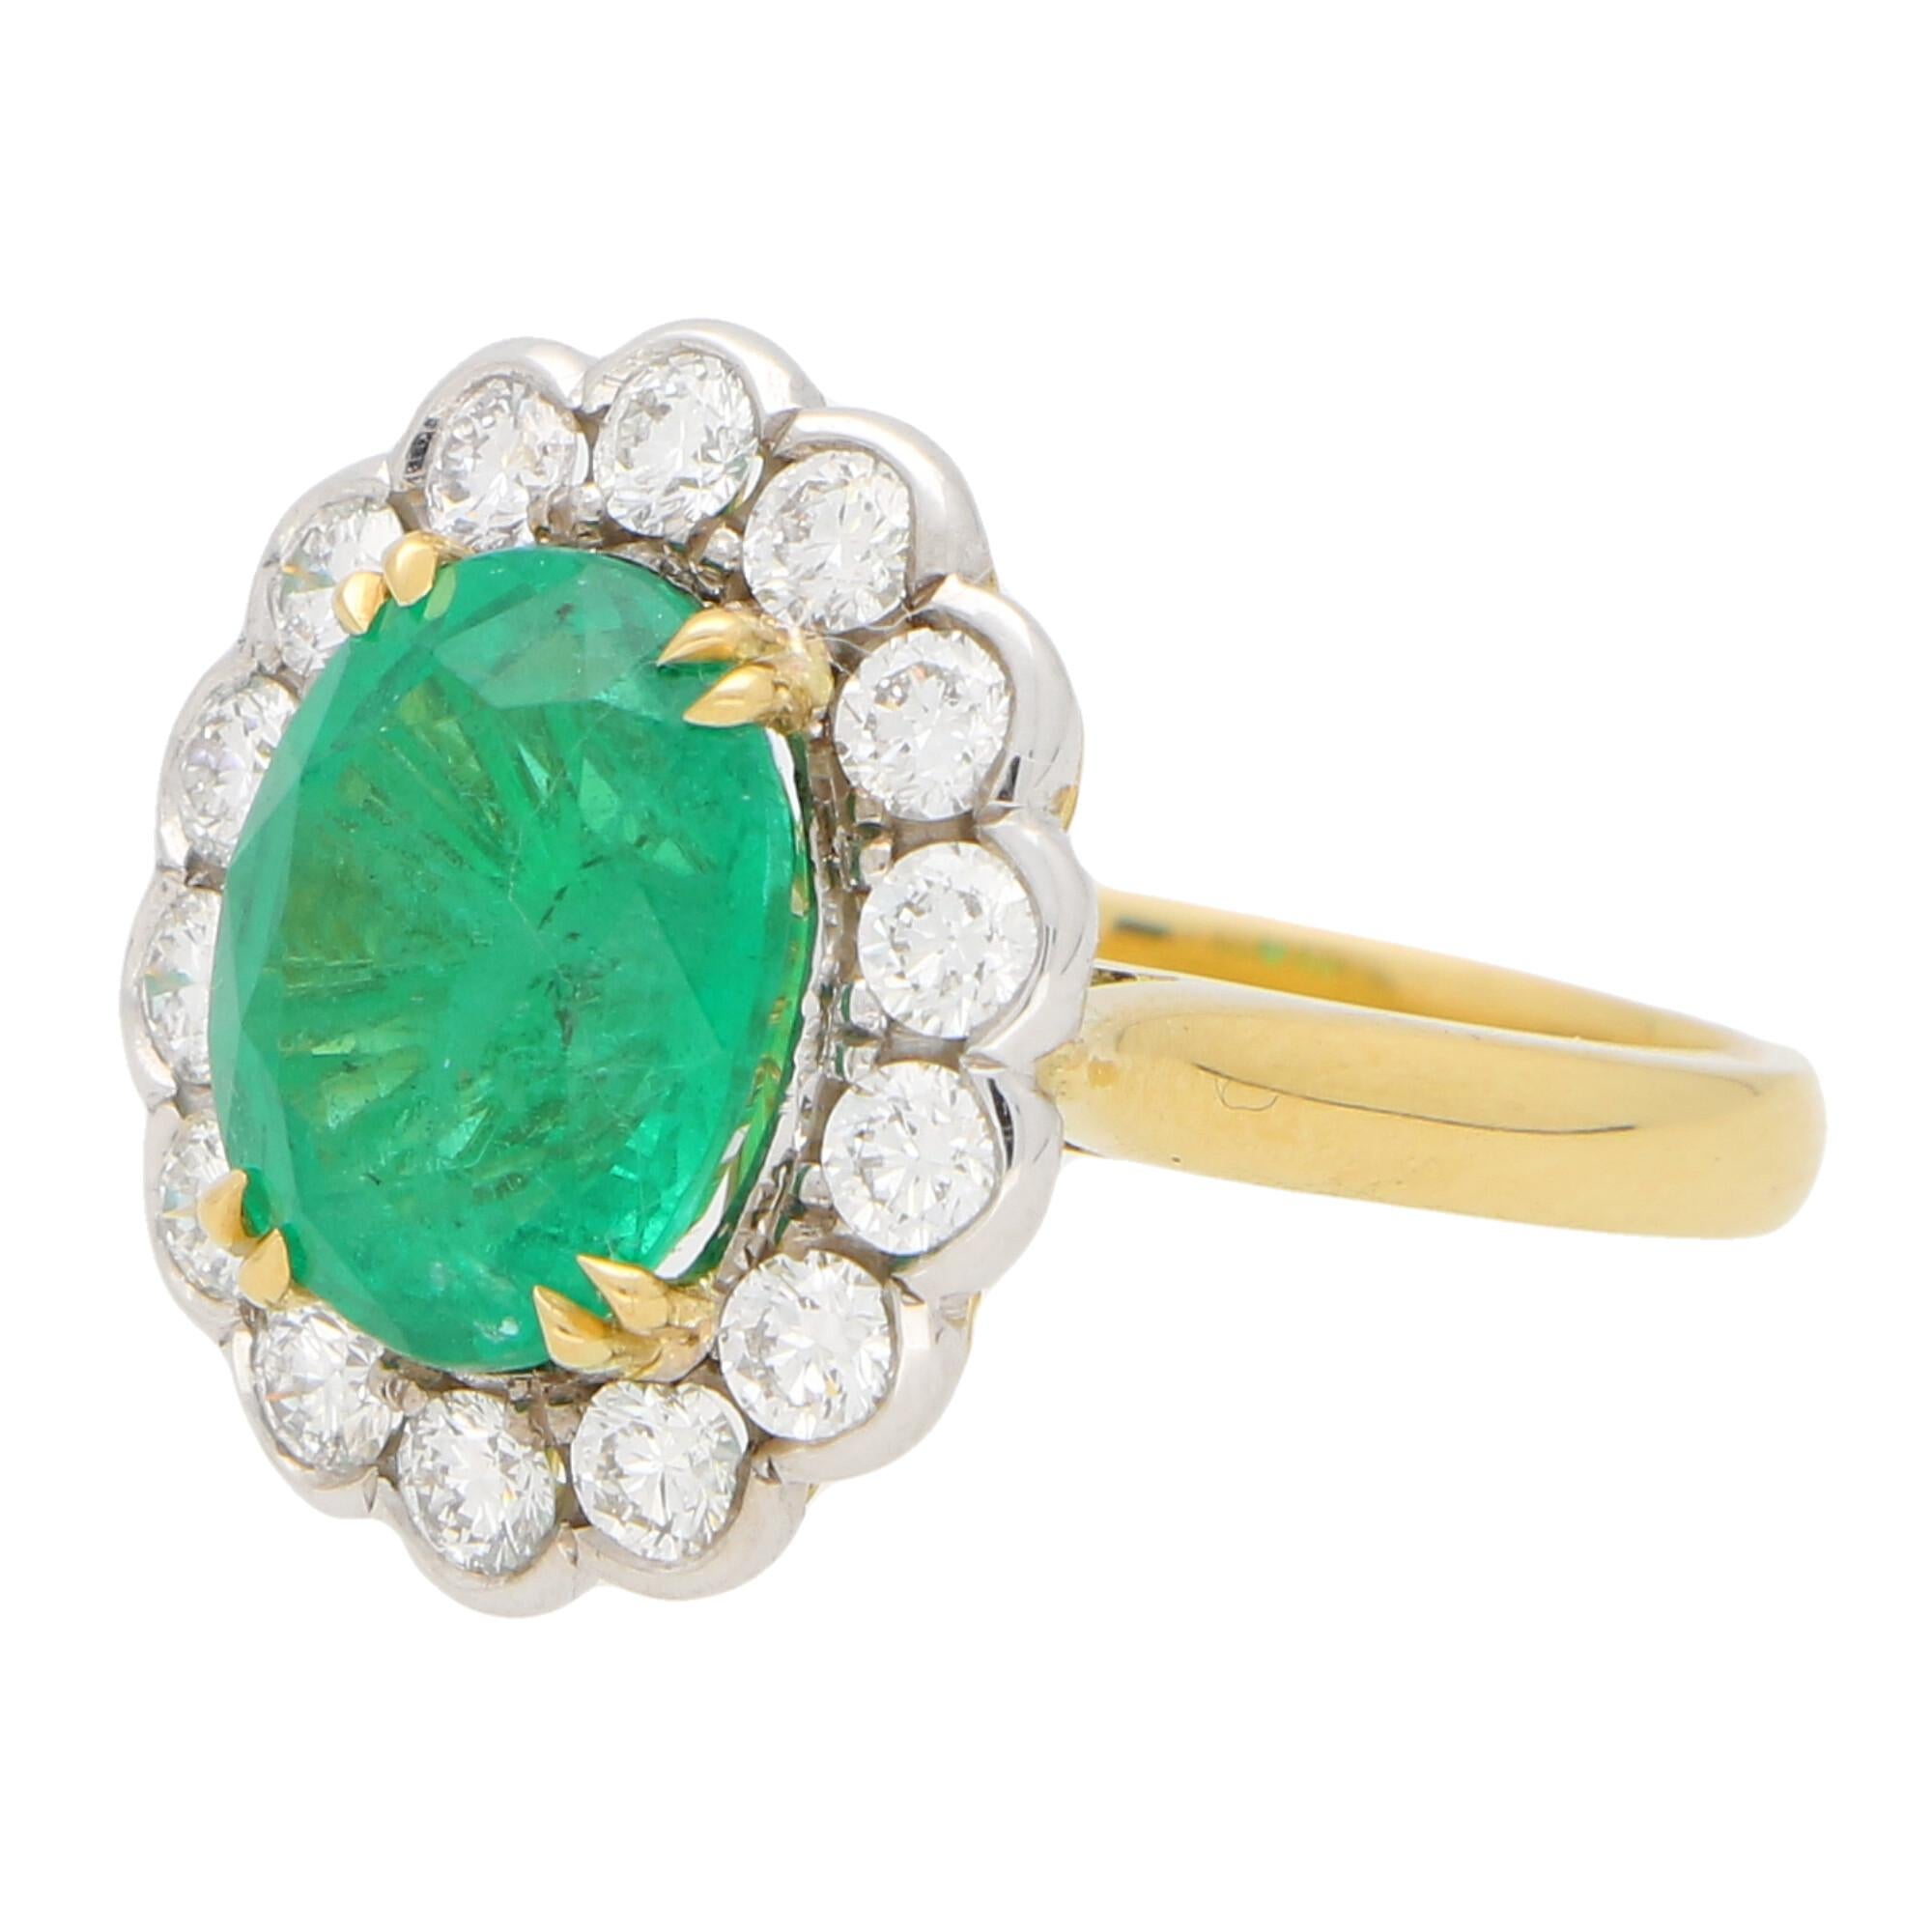 A truly stunning emerald and diamond cluster ring set in 18k yellow and white gold.

The piece is centrally set with an astounding 3.79 carat oval cut emerald which is claw set in yellow gold. The emerald has a fantastic vibrant green colour to it